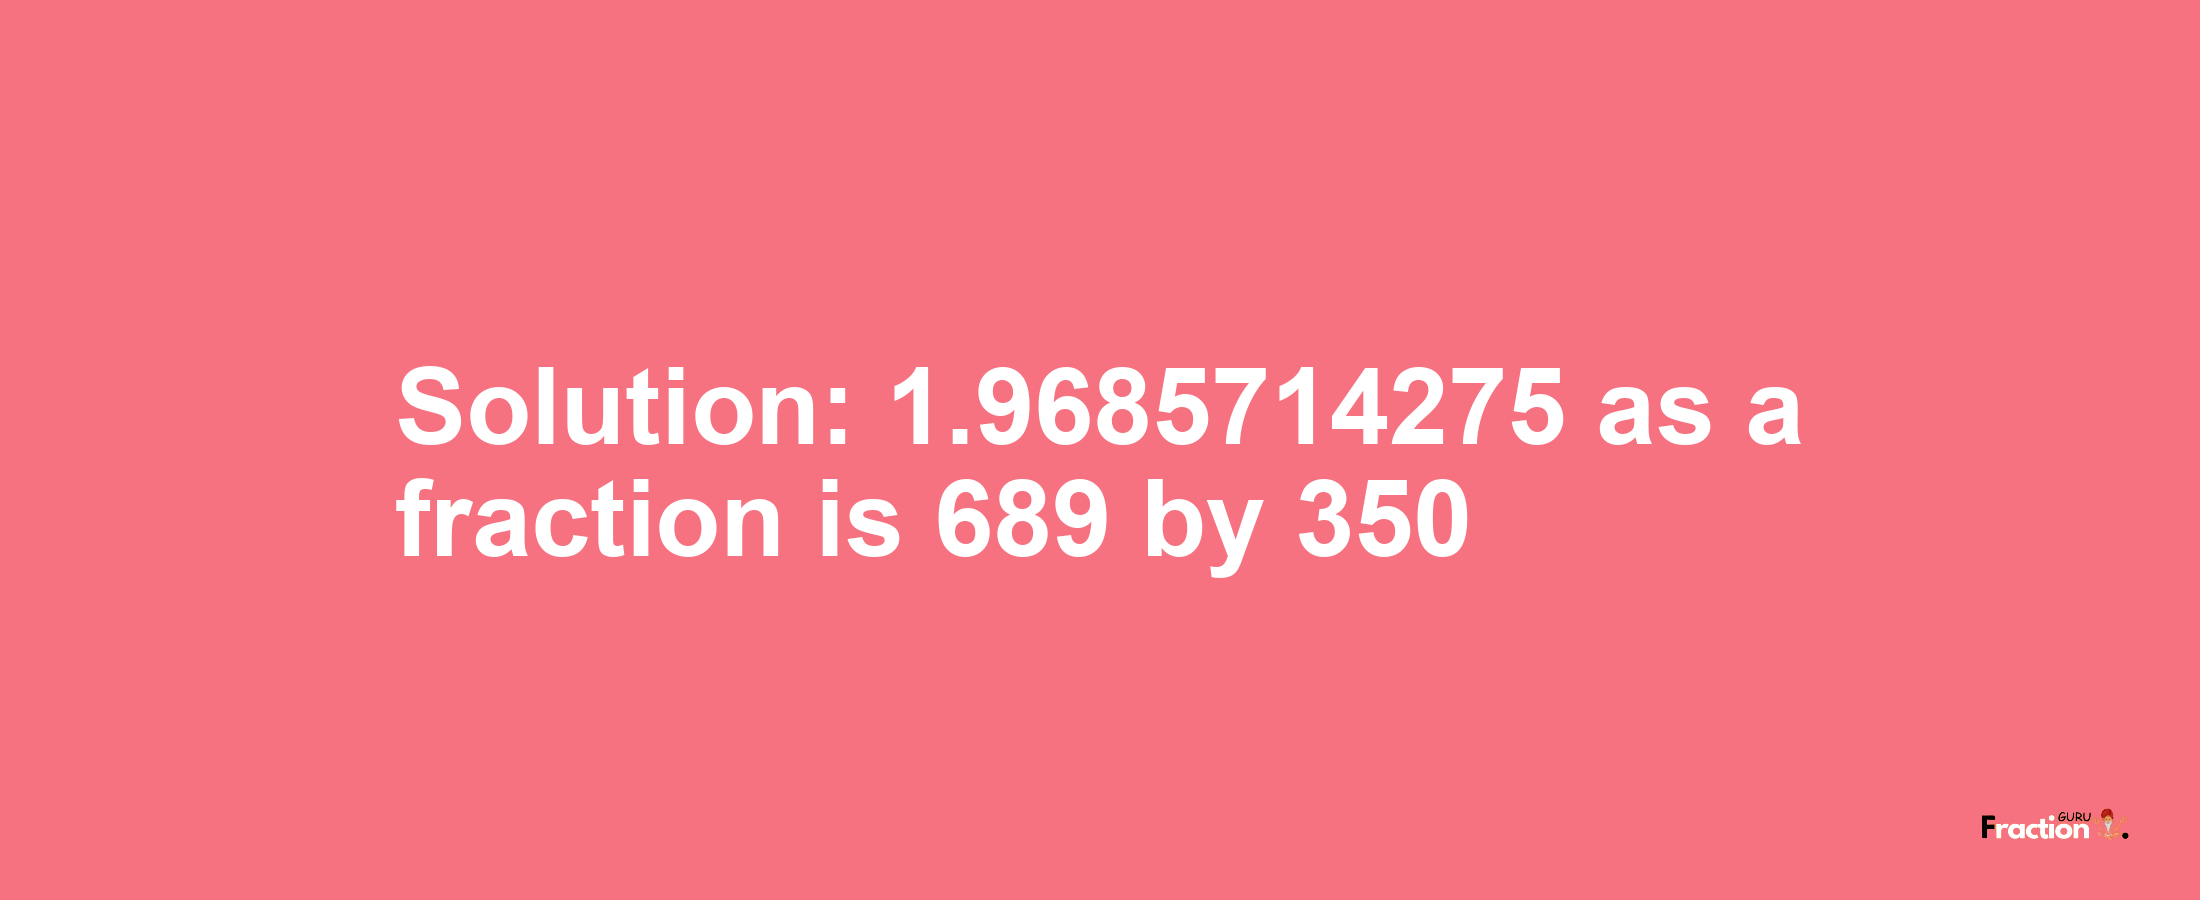 Solution:1.9685714275 as a fraction is 689/350